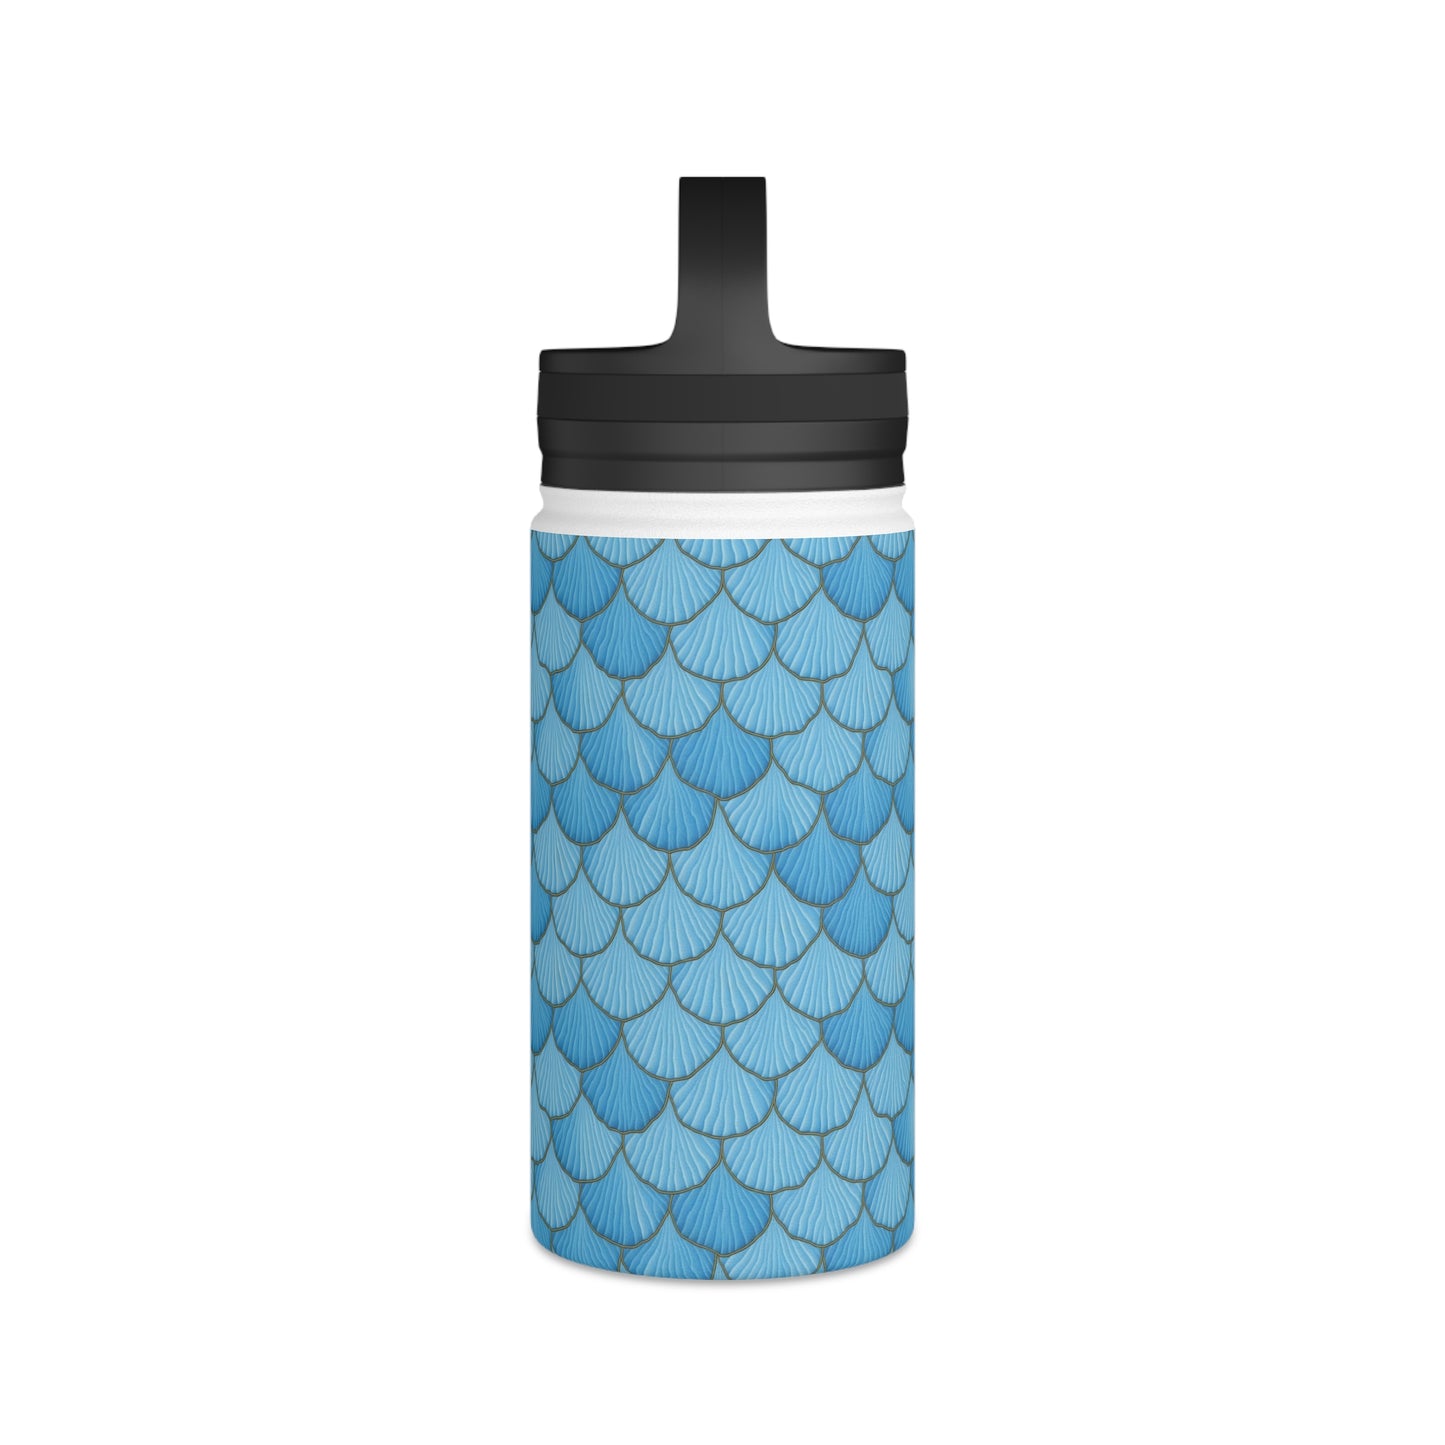 Dive into Enchantment Blue Mermaid Seashell Stainless Steel Water Bottle, Handle Lid, Reusable eco friendly, Reduce Waste, Green Living